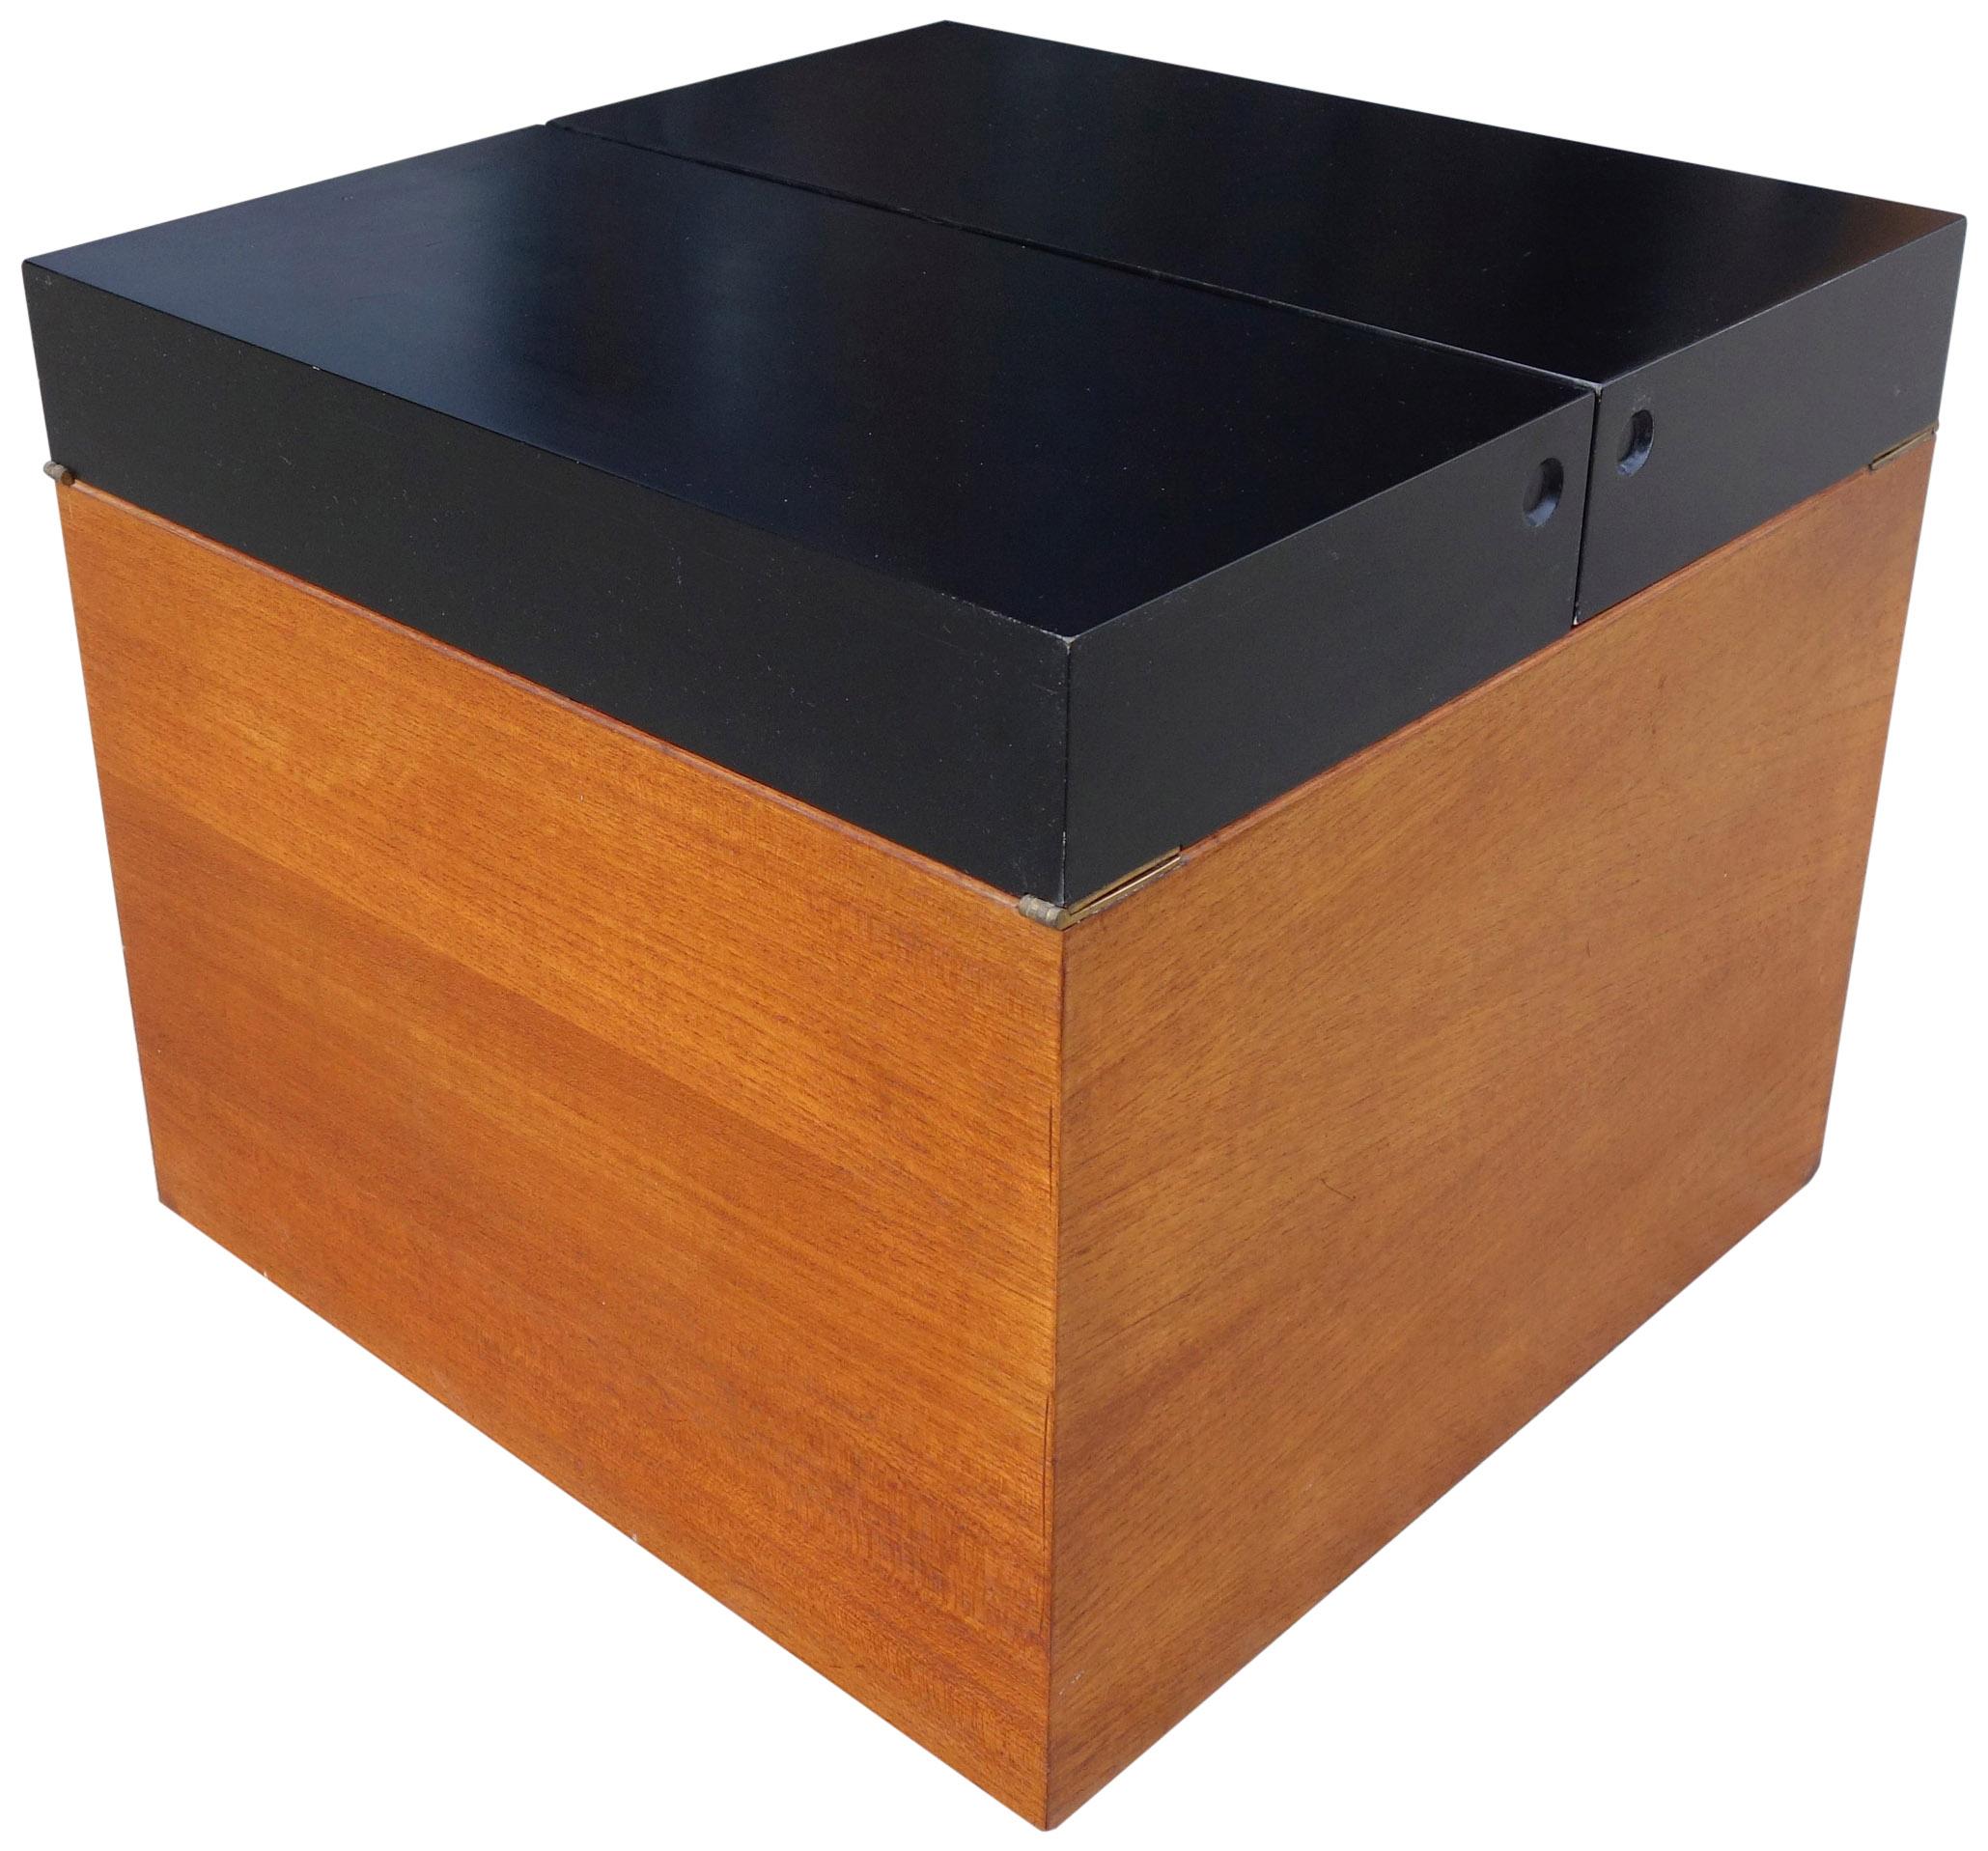 For your consideration is this wonderful bar cube that can also be used as a side table or even a small coffee table. Featuring teak wood with a black lacquer top on a floating rolling base. Inside reveals storage shelves and one removable